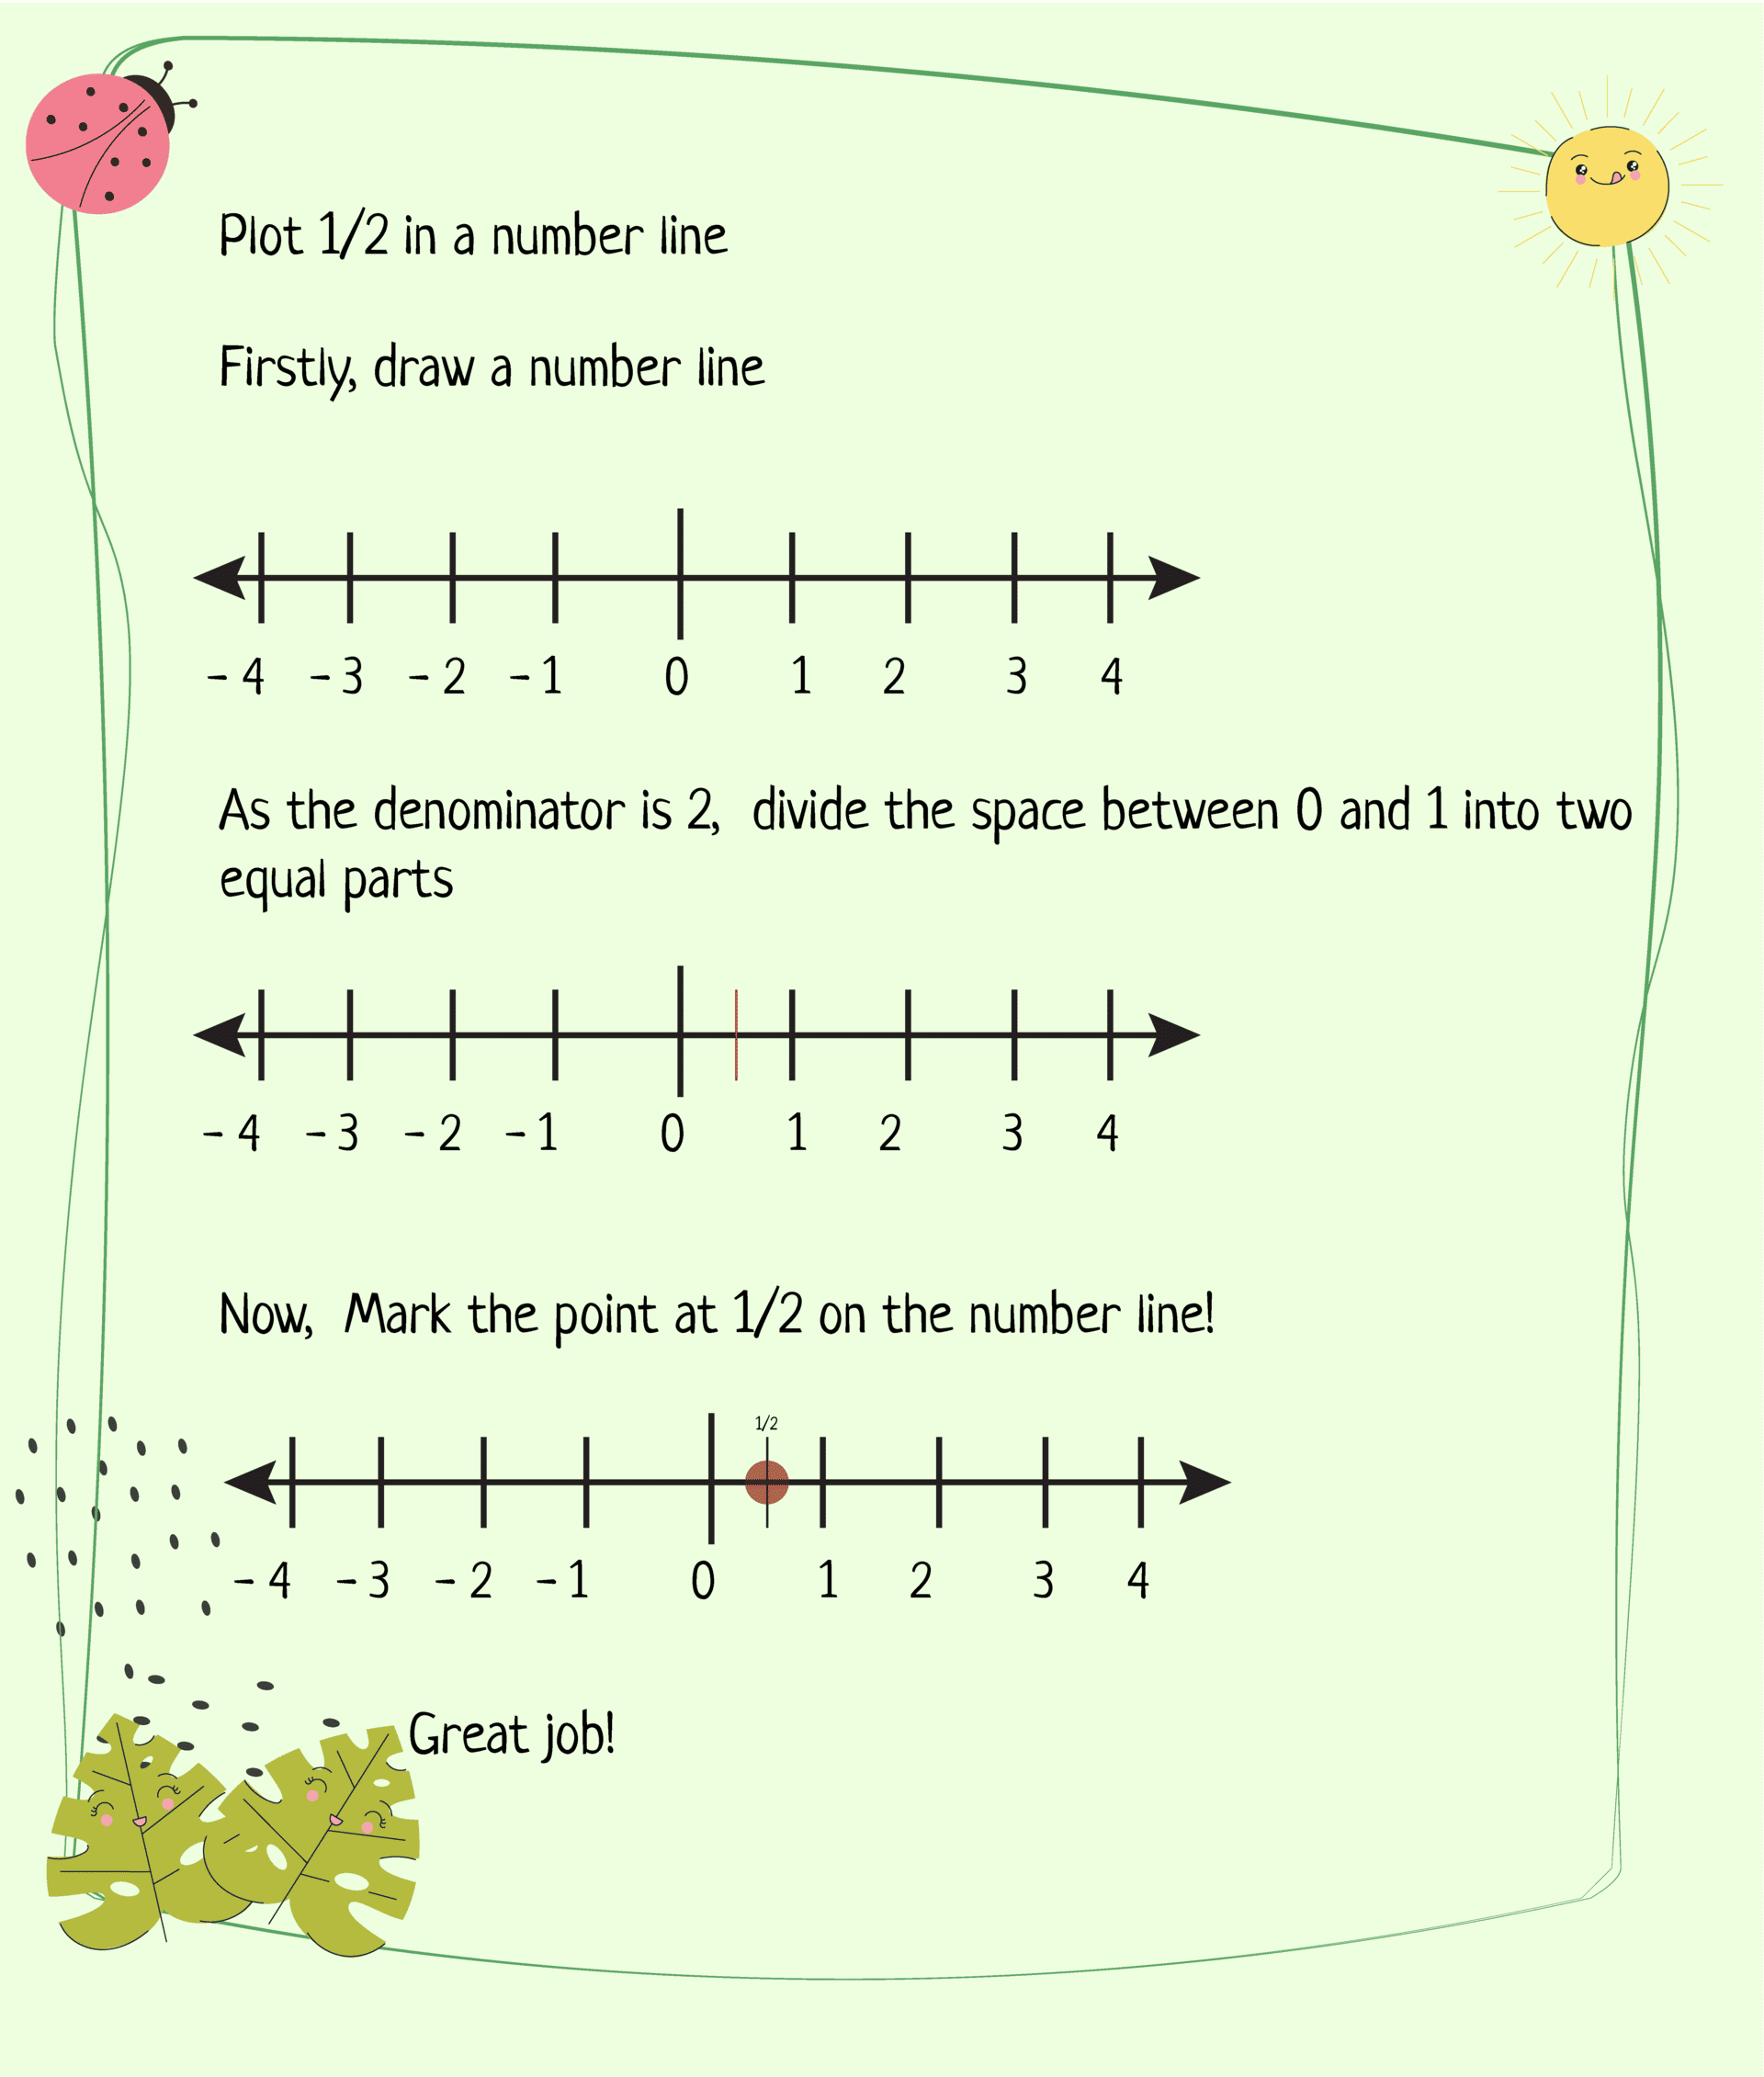 Steps of Plotting Positive Numbers in a Number Line-01-01